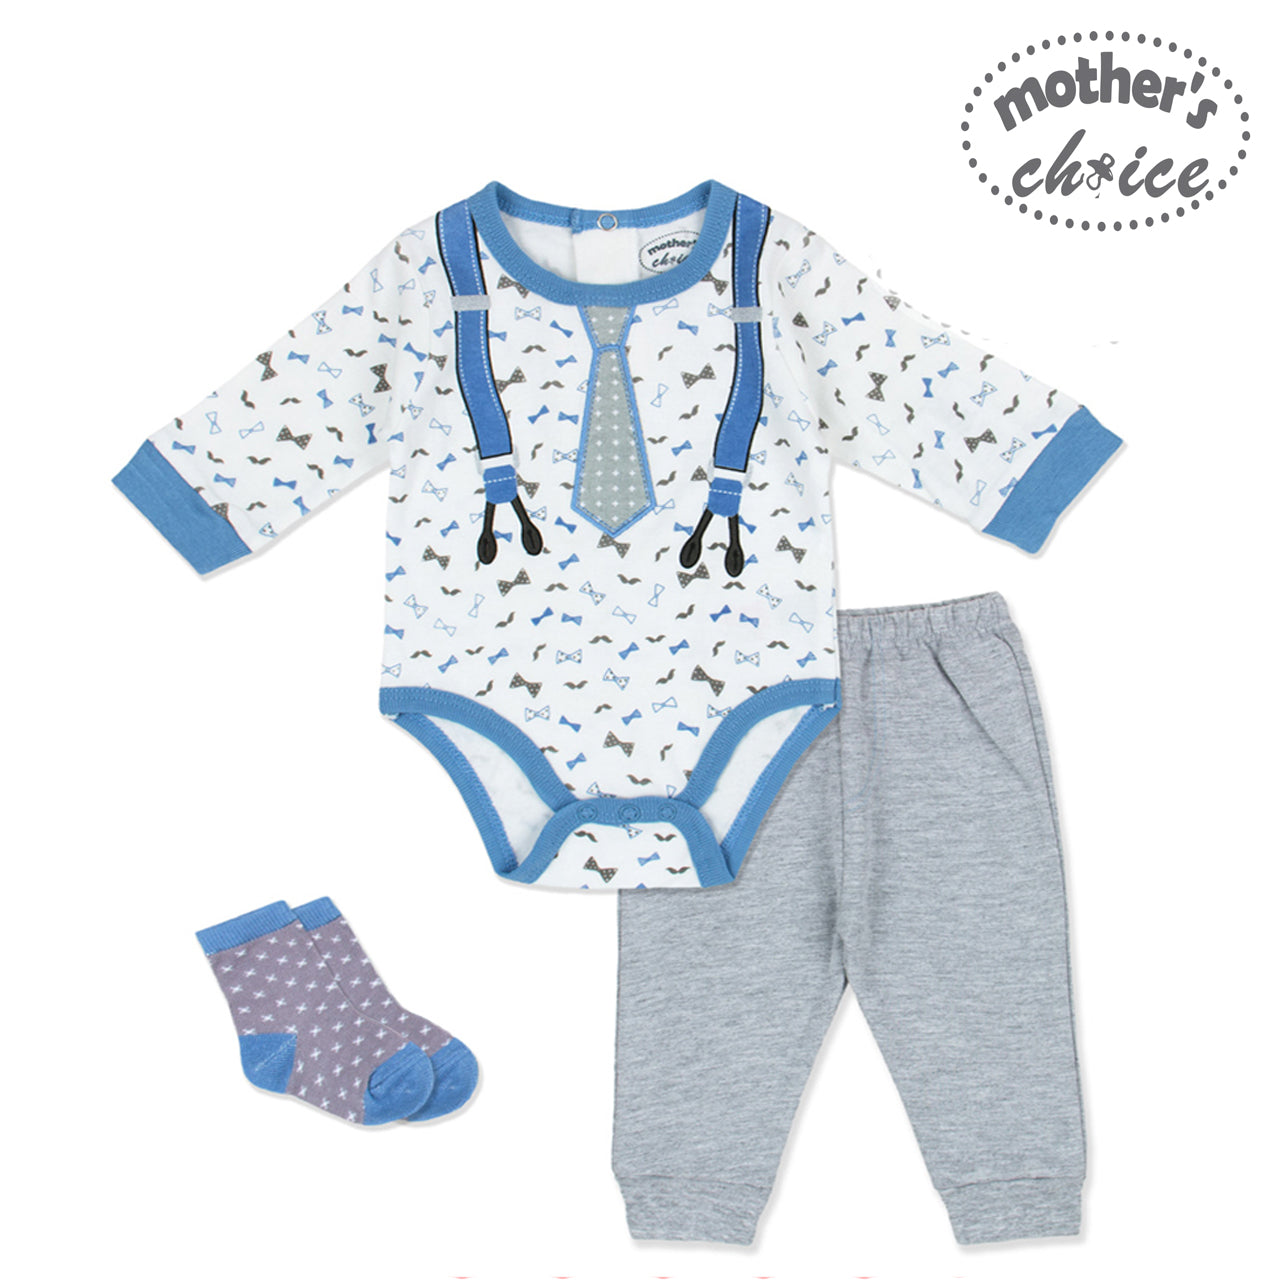 Mother's Choice 3 Piece Set of Onesie, Leggings and Socks (IT1584)